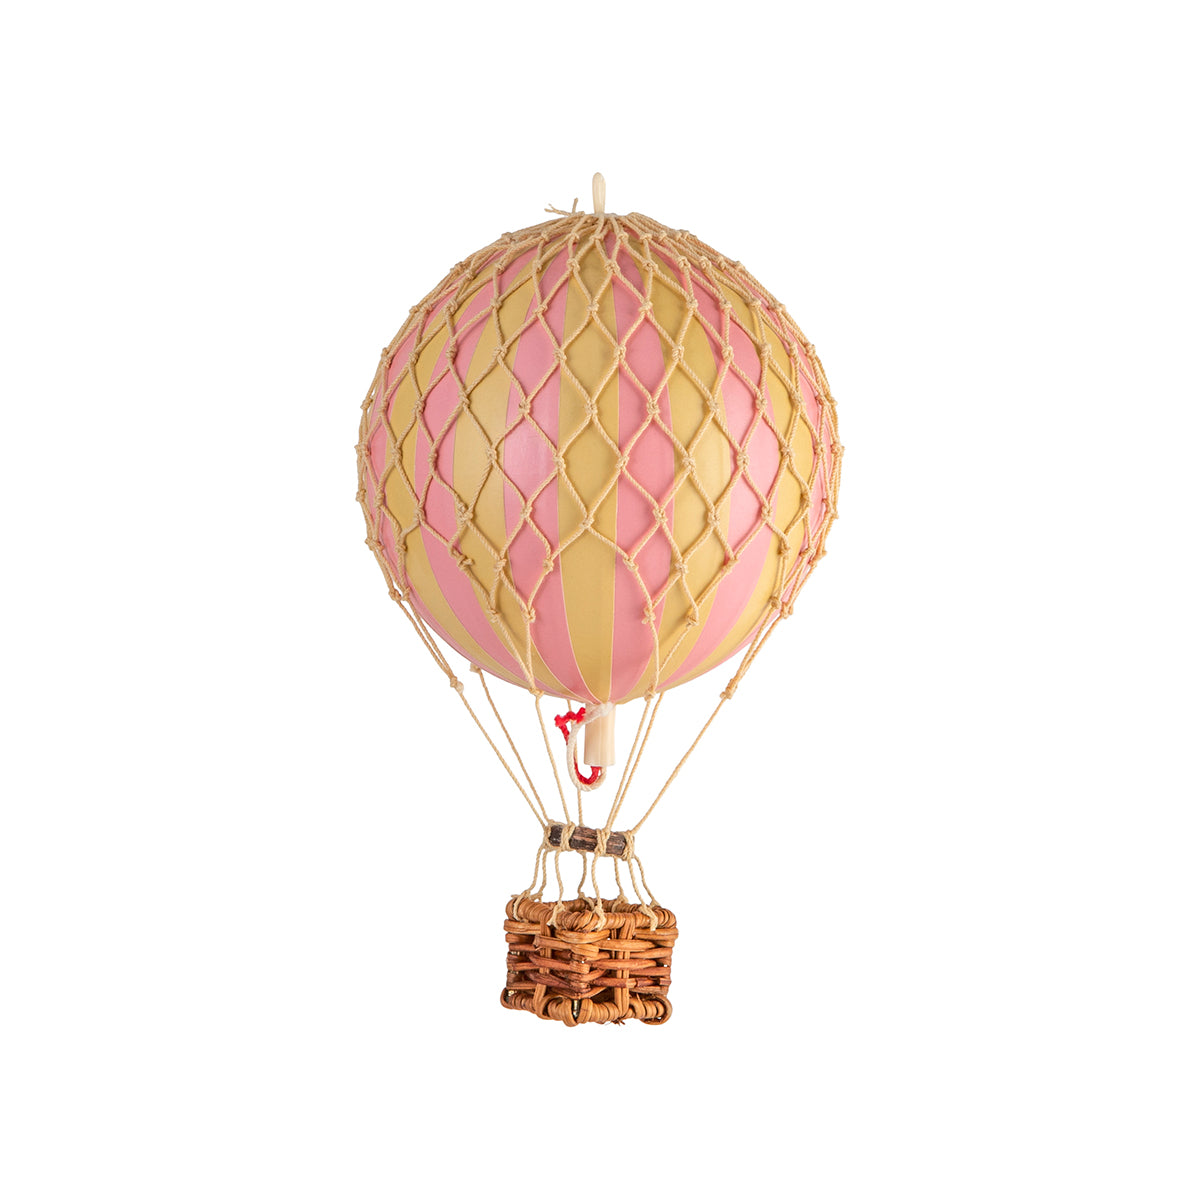 A whimsical journey featuring a Wonderen Extra Small Hot Air Balloon - Floating The Skies by Wonderen Stroopwafels floating against a serene white background.